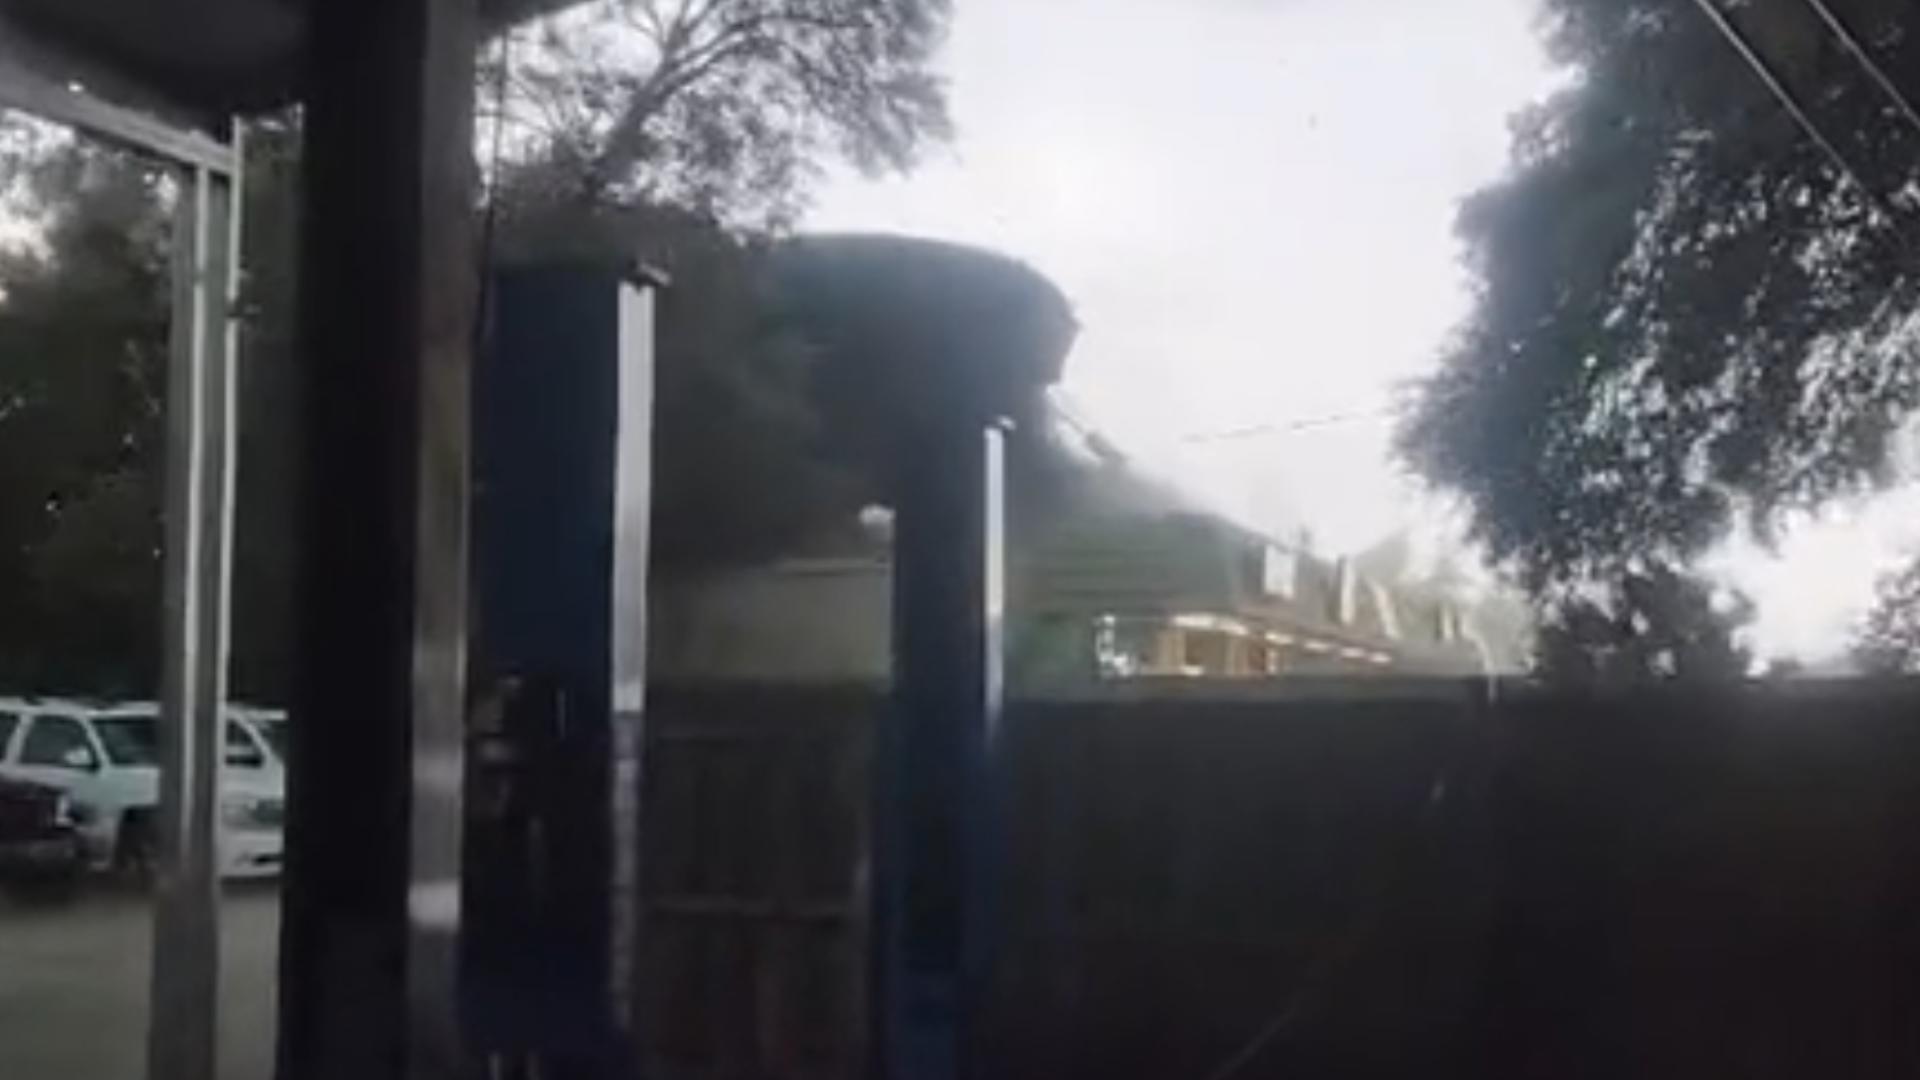 Onlookers film a roof being ripped off a Jacksonville business.